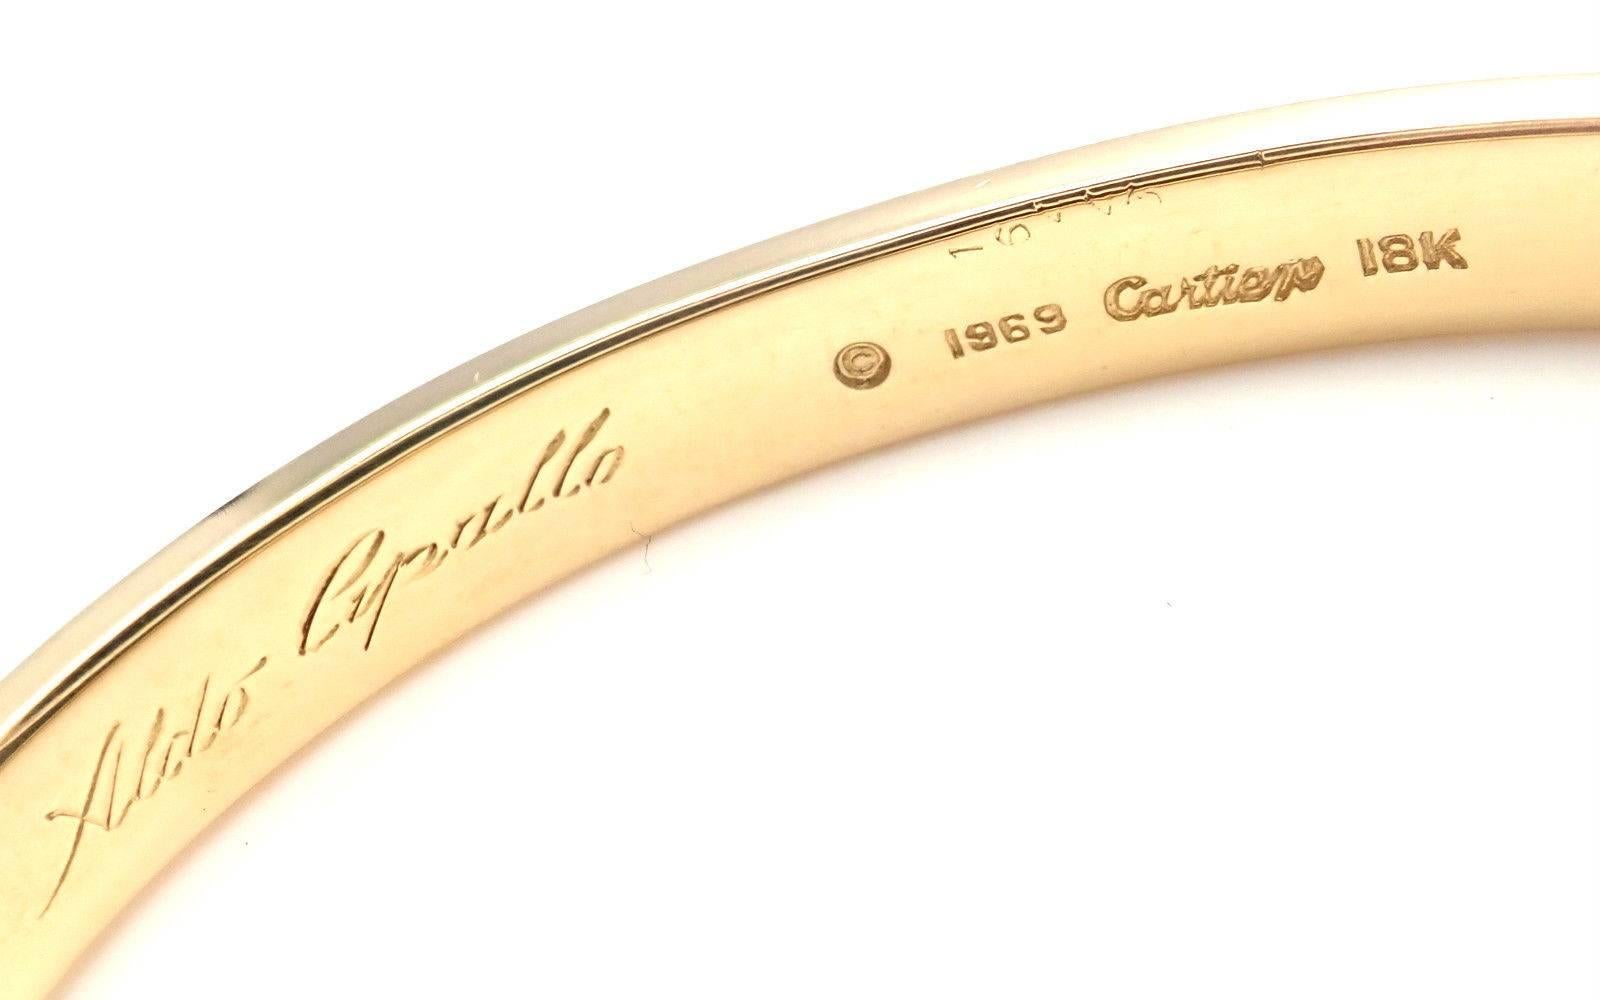 18k Yellow Gold Original Vintage Love Bangle Bracelet by Aldo Cipullo for Cartier.
This bracelet comes with a Cartier box and Cartier screwdriver.
Details: 
Size: 16
Weight: 12 grams
Width: 6.5mm 
Hallmarks: Cartier 18k 1969 16443
*Free Shipping